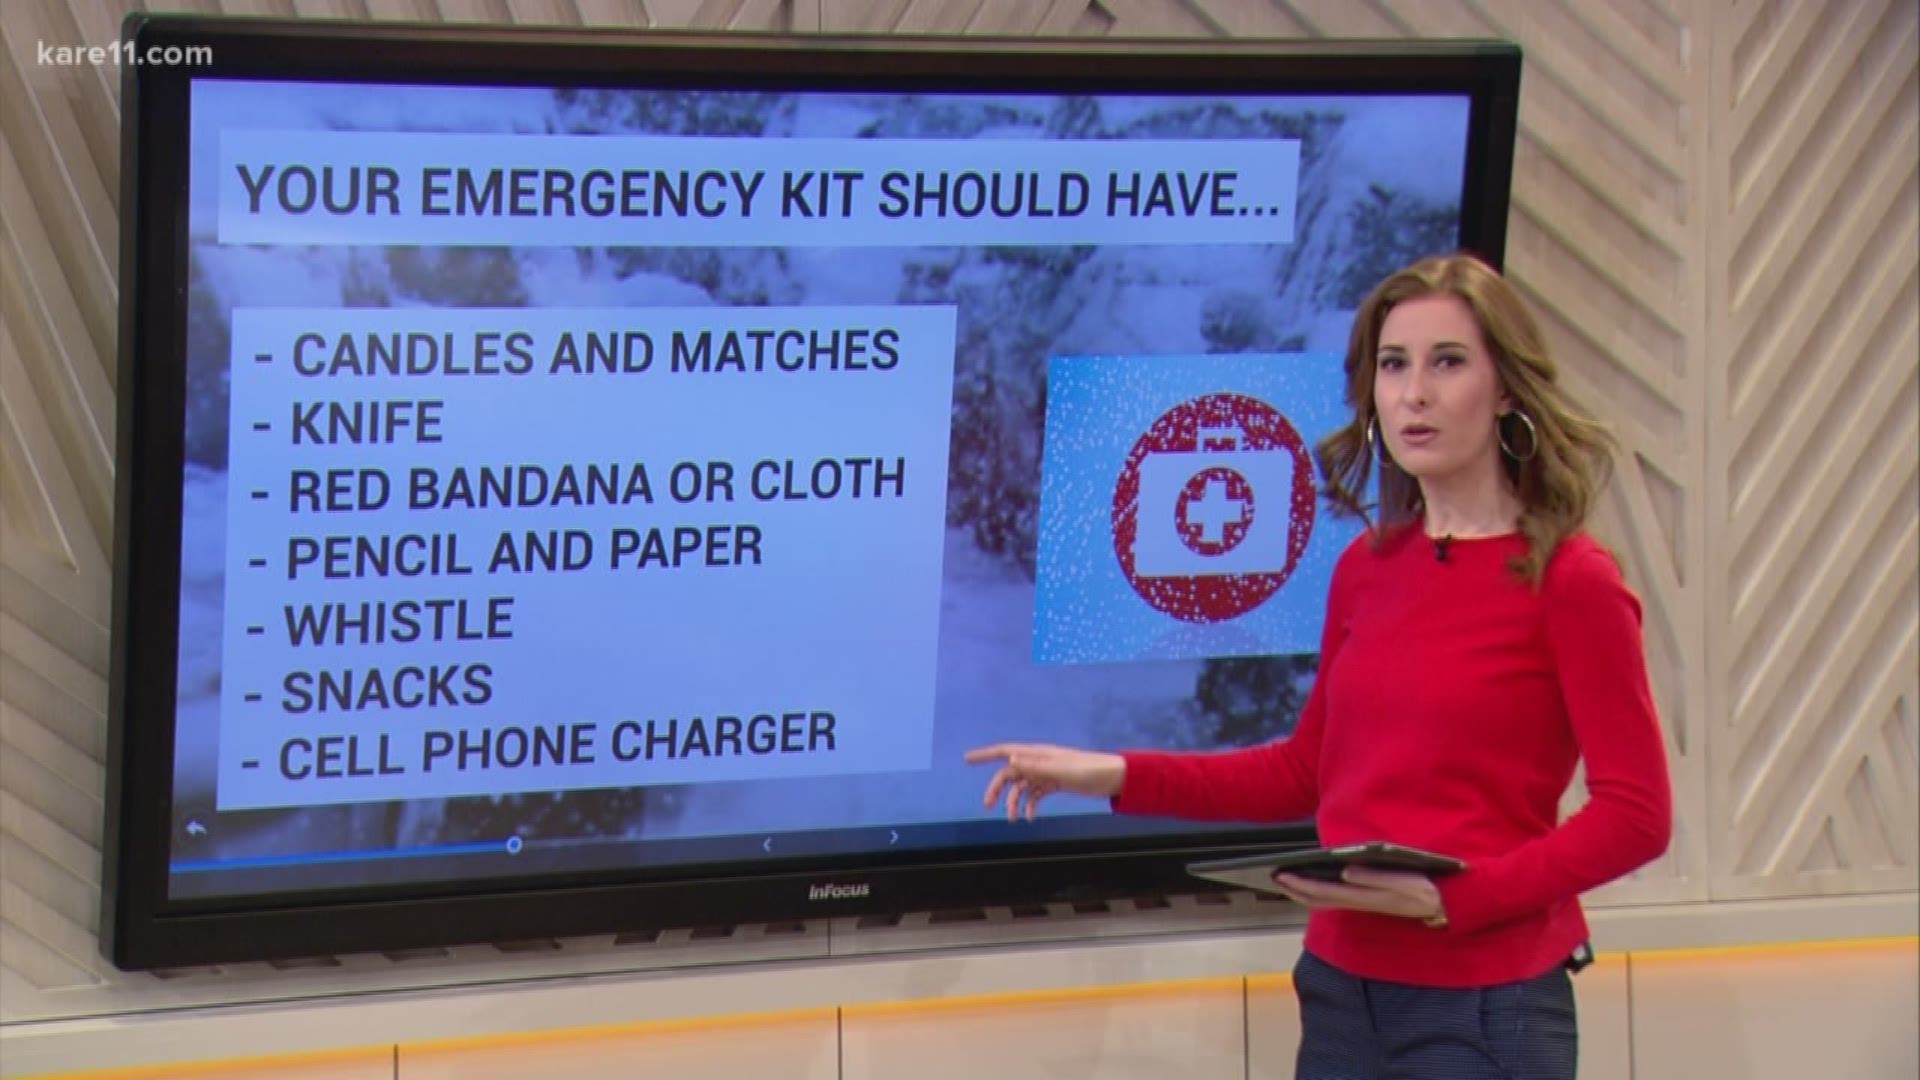 No more procrastinating! If you don't have a survival kit, make one today. https://kare11.tv/2G9HqSC